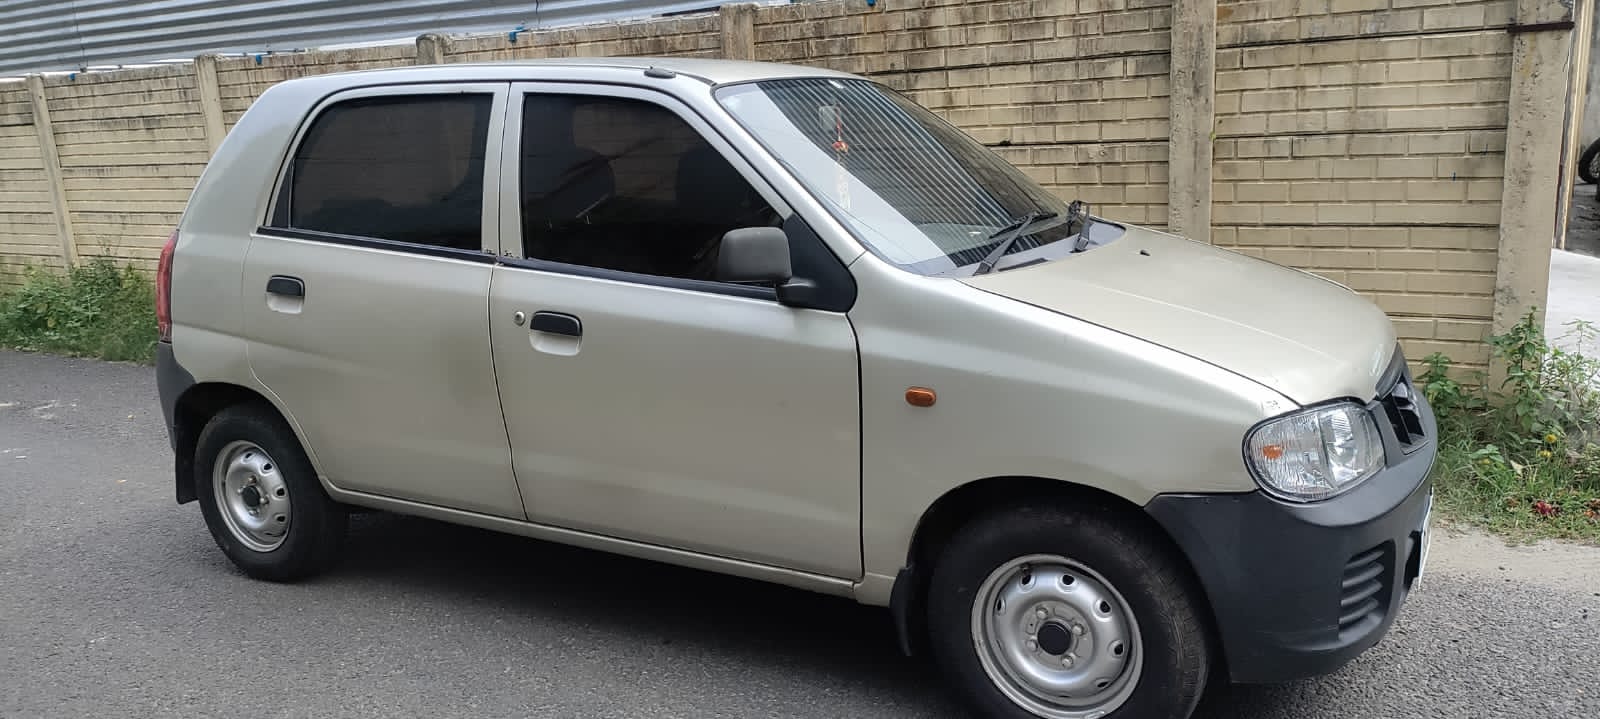 5311-for-sale-Maruthi-Suzuki-Alto-Petrol-Second-Owner-2006-TN-registered-rs-0